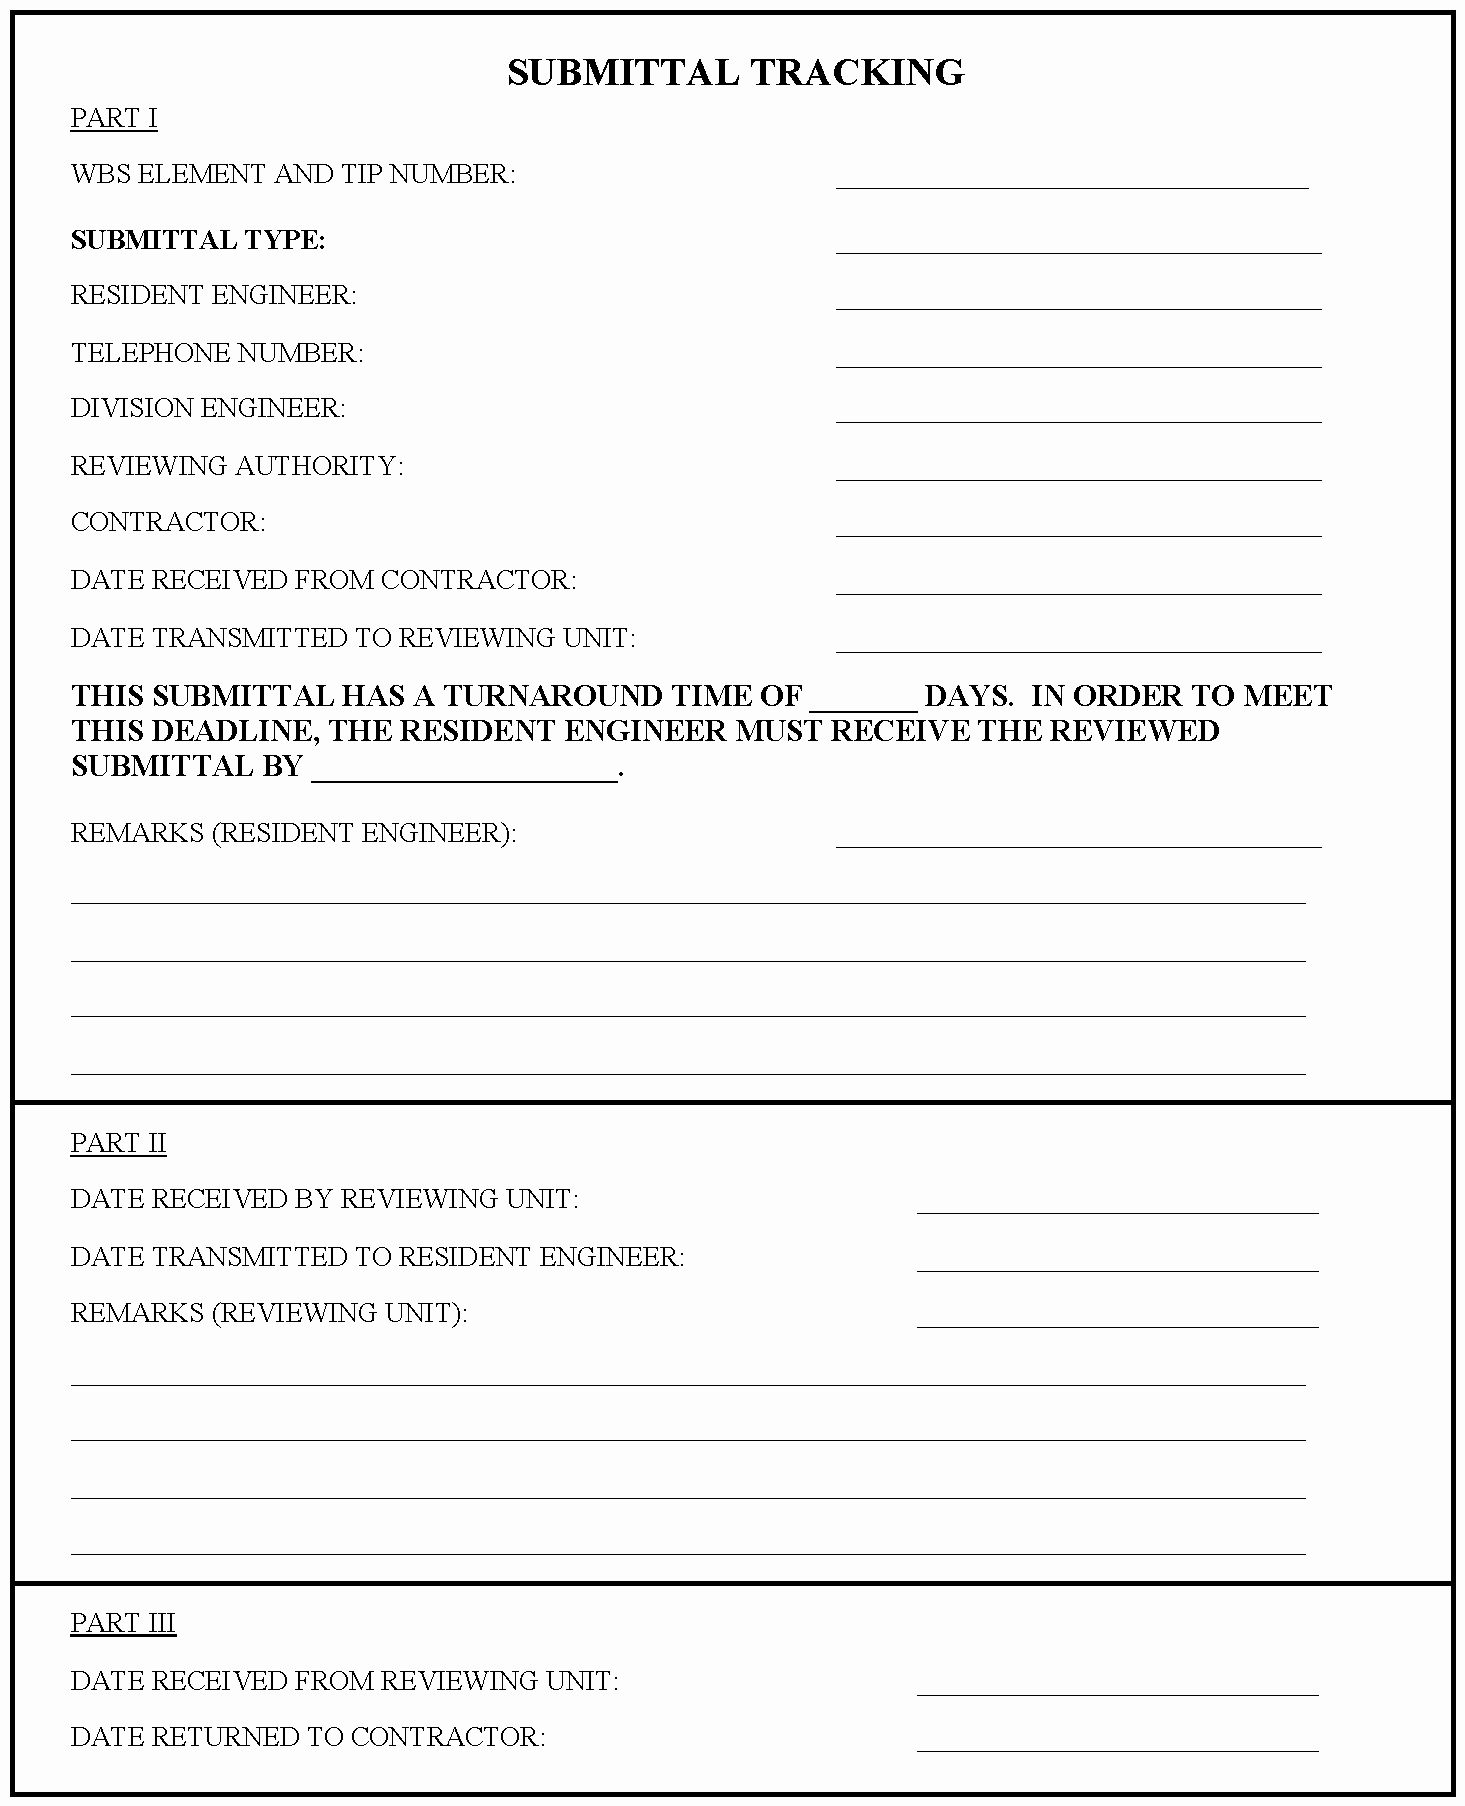 Material Transmittal form Best Of 19 Of Bid Submittal Template